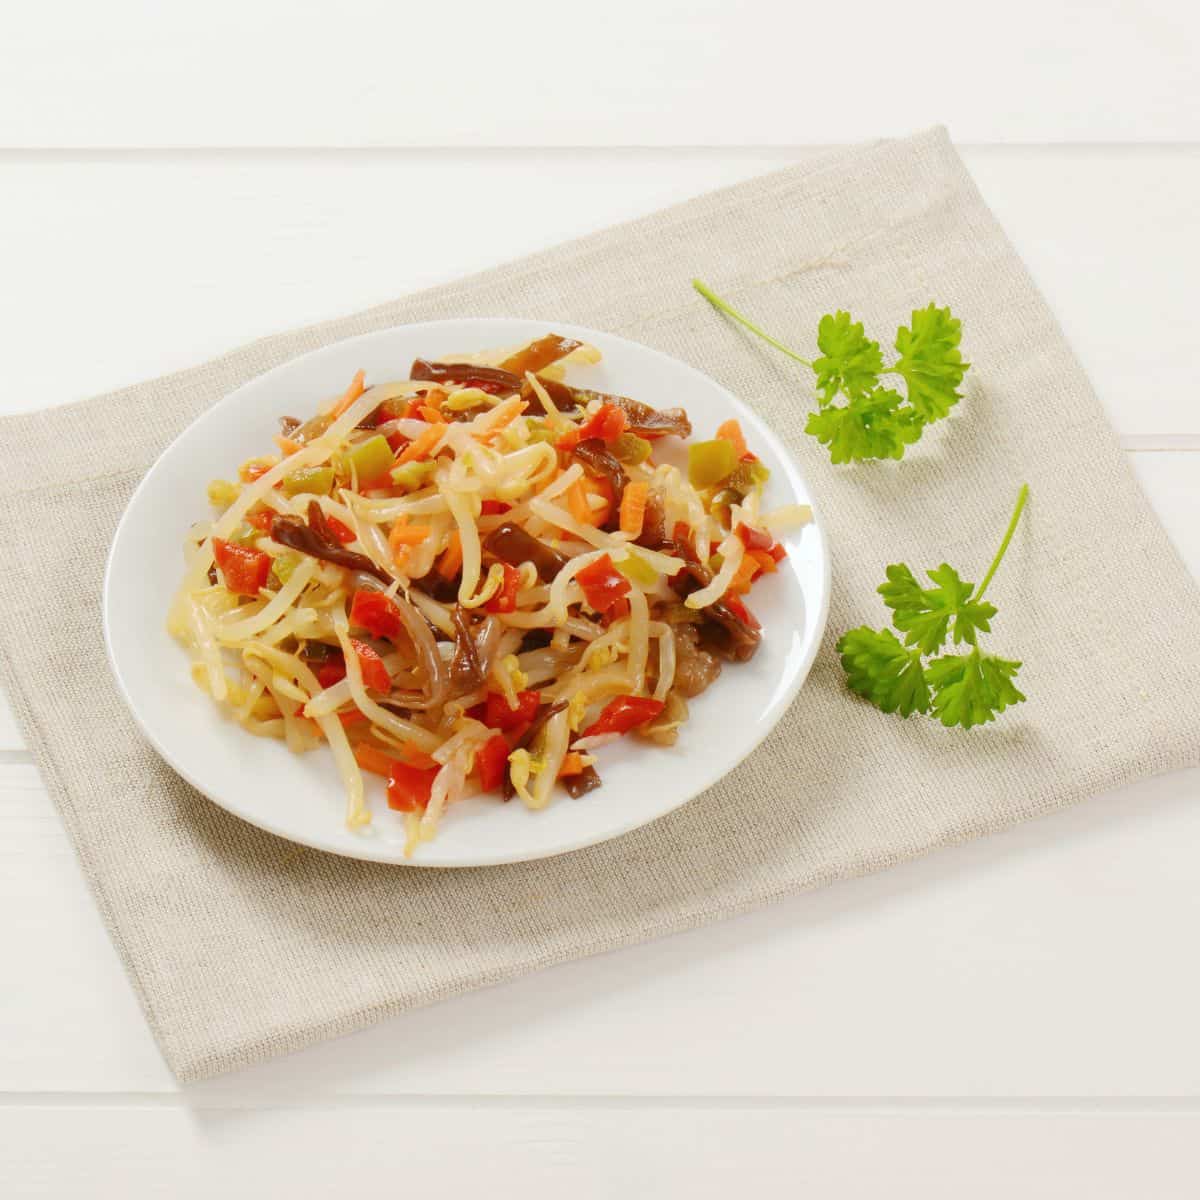 A plate of pasta with vegetables and **parsley**.